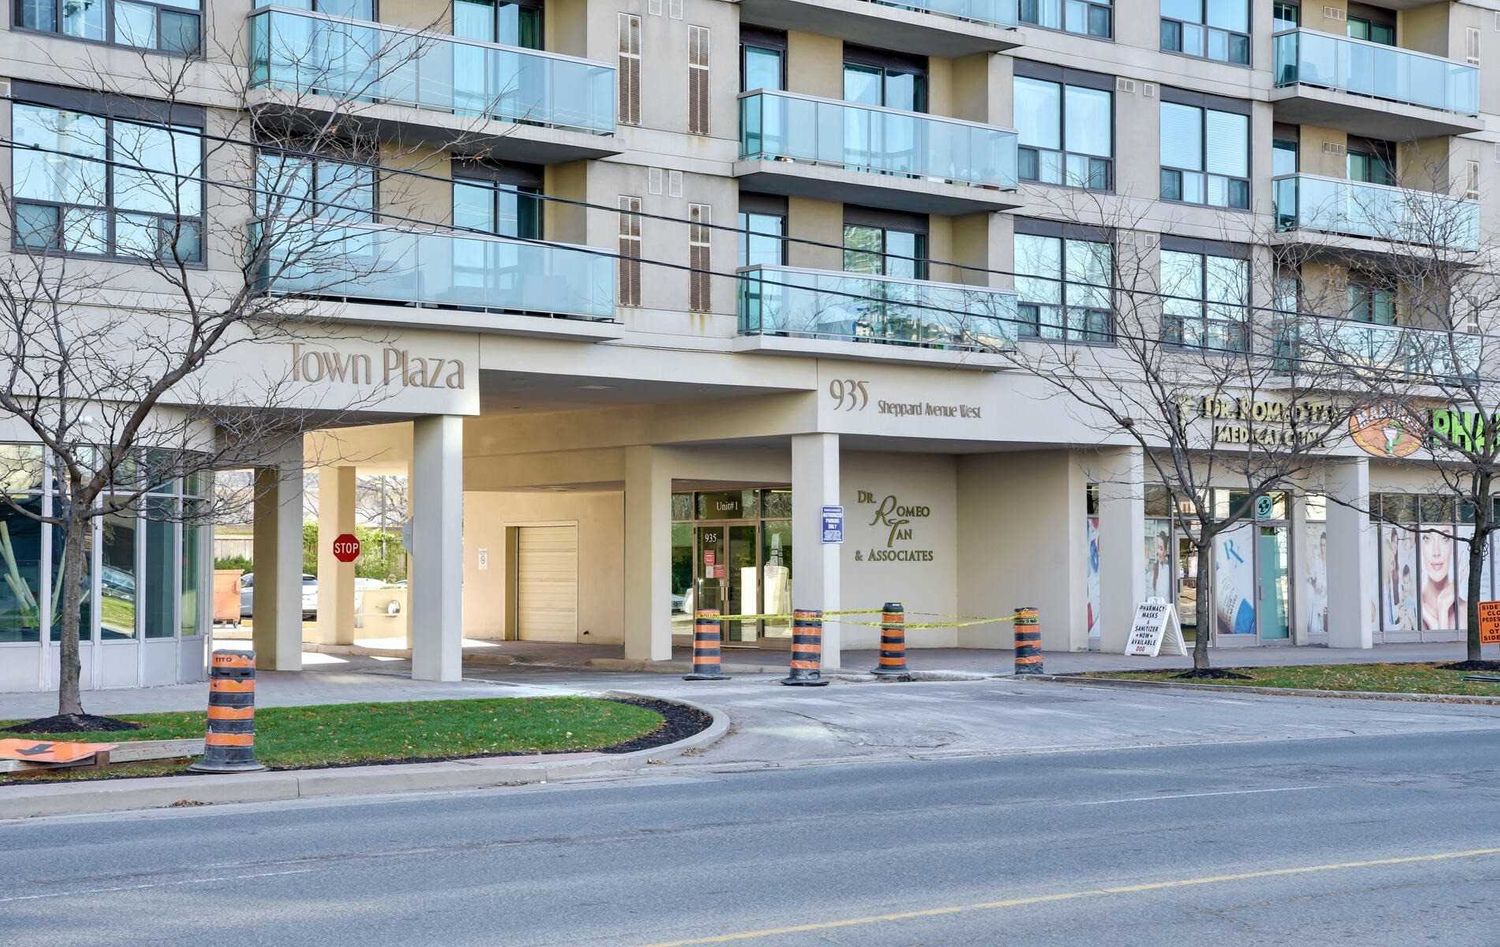 935 Sheppard Avenue W. The Town Plaza Condos is located in  North York, Toronto - image #2 of 3